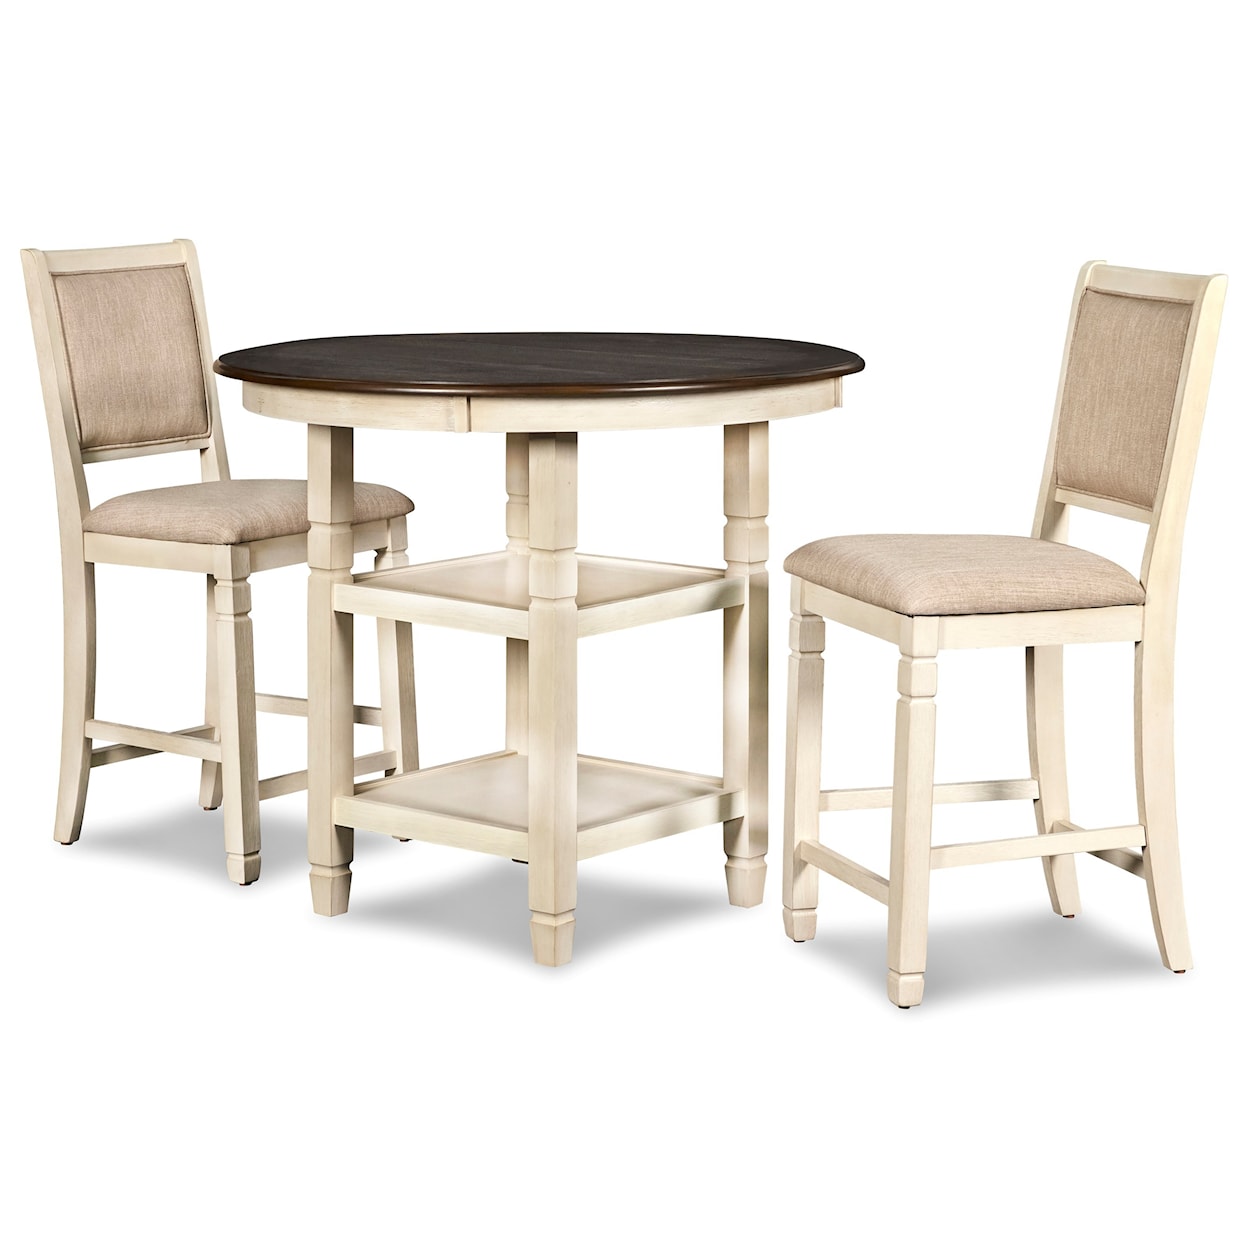 New Classic Furniture Prairie Point 3-Piece Table & Chair Set